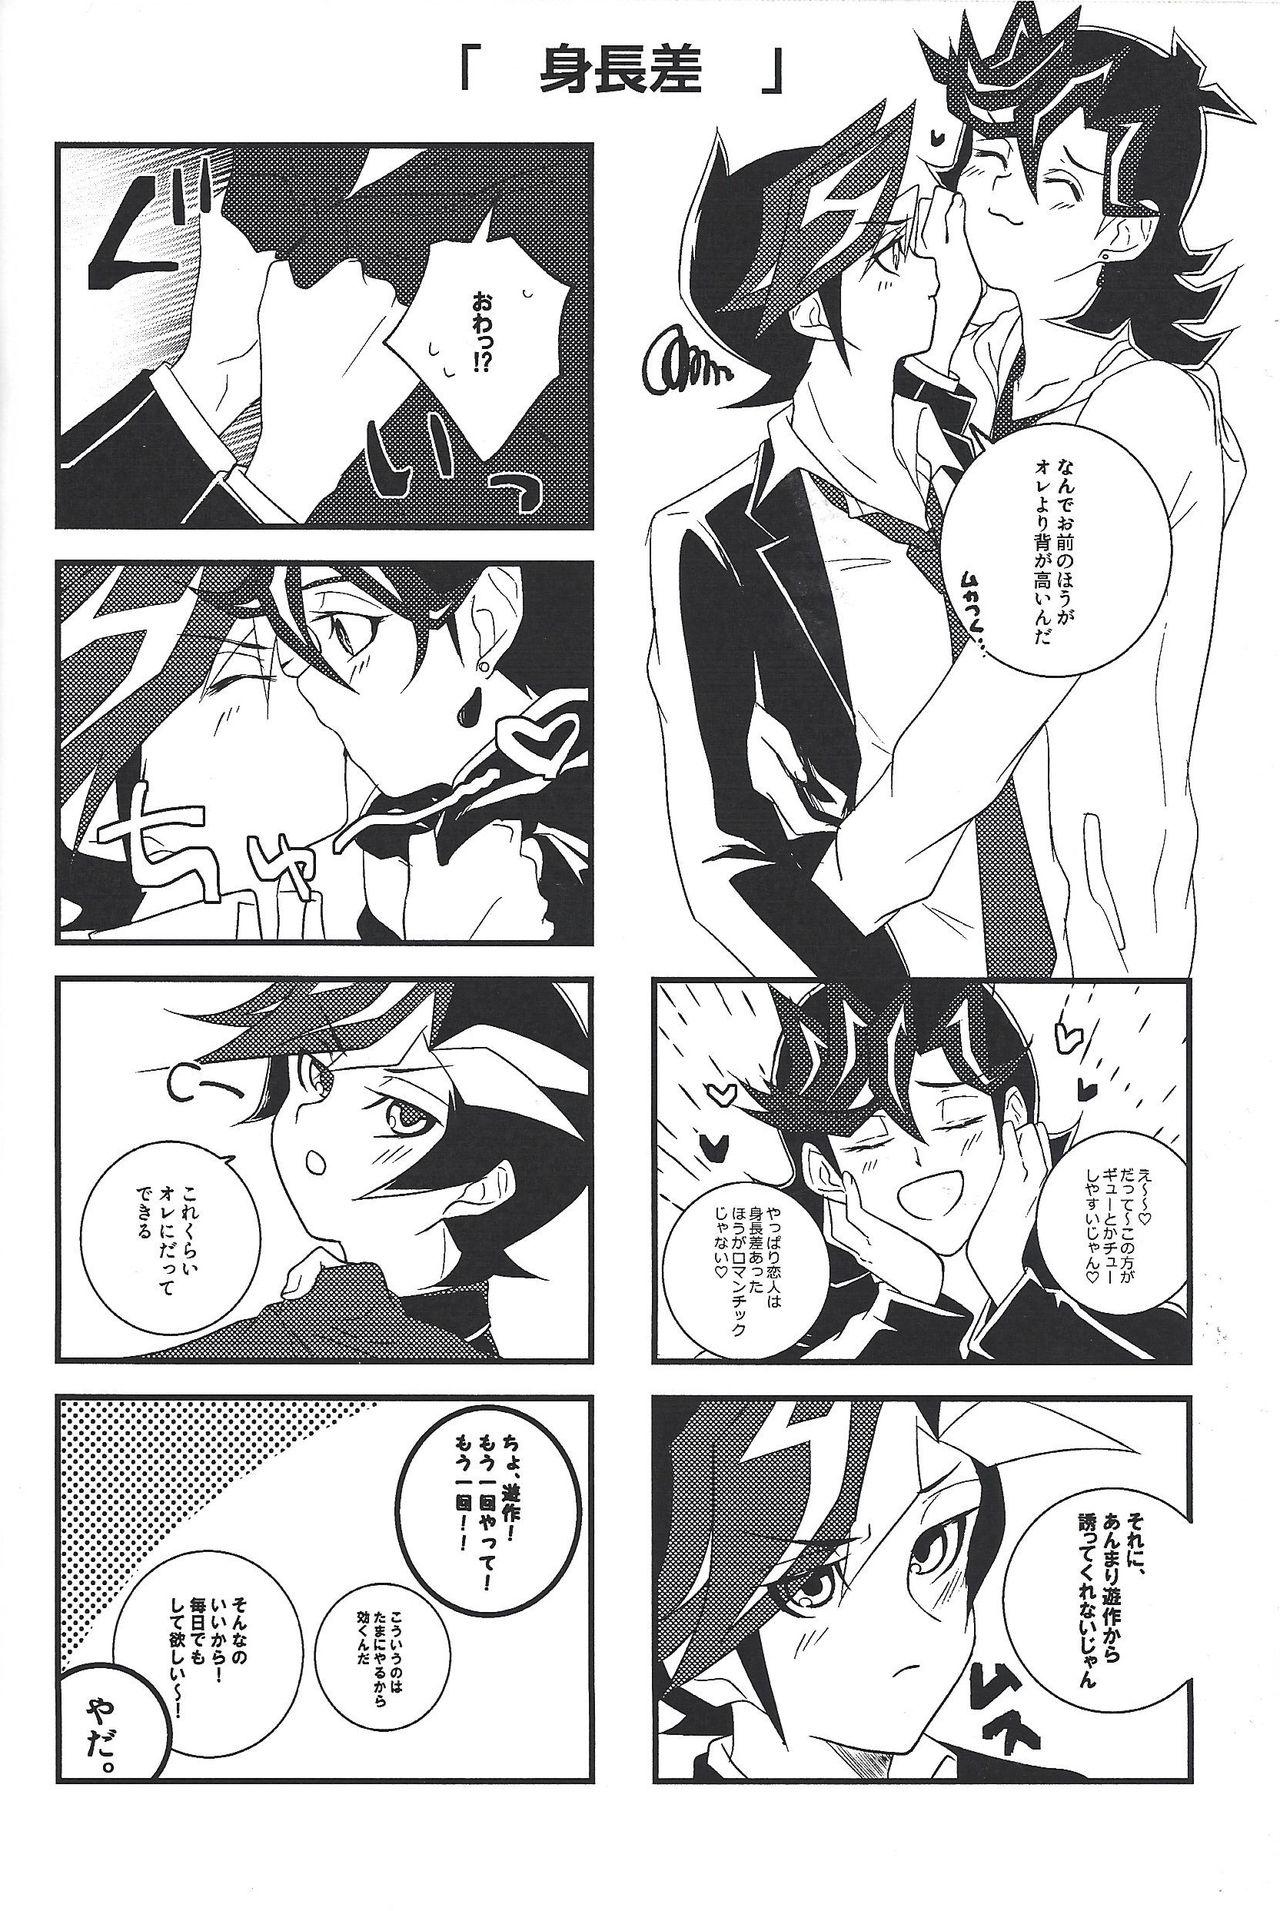 Behind Ai♡U - Yu gi oh vrains Sexy Whores - Page 3